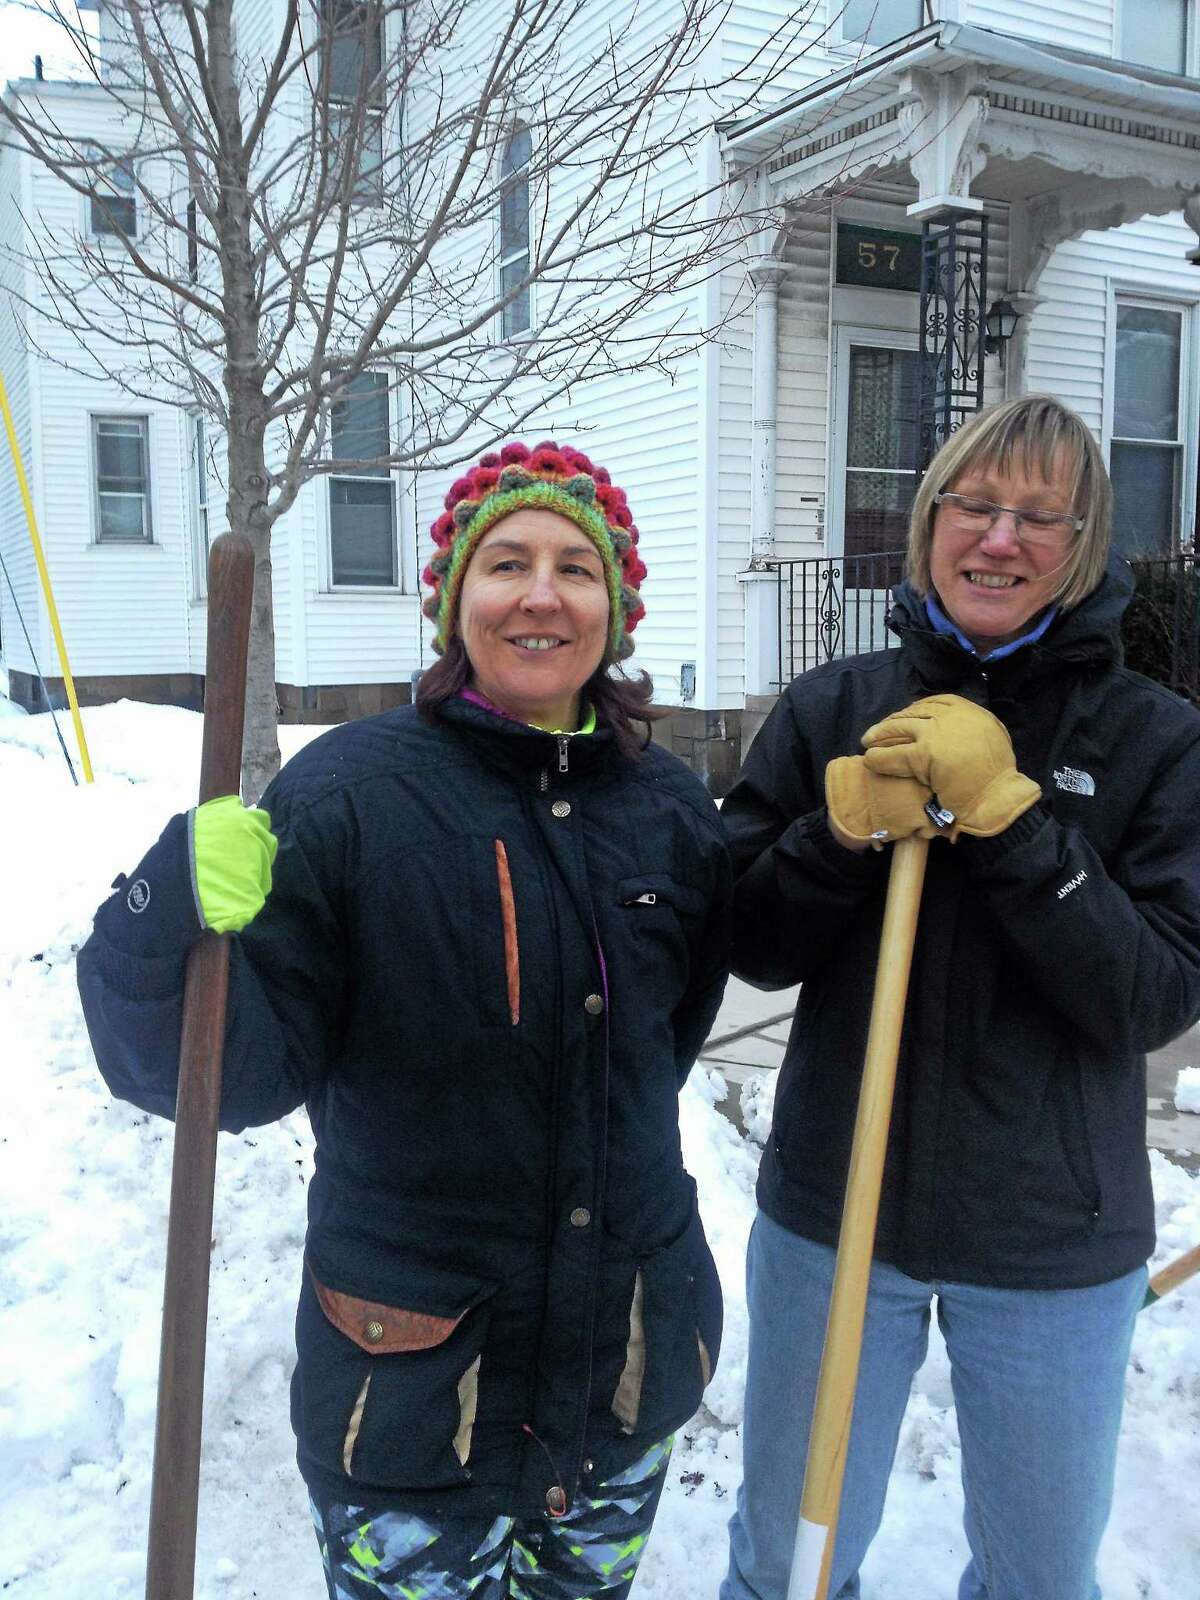 Lisa Siedlarz and Christiane Cunnar take a break from shoveling on Pearl Street. Register photo - Mary O’Leary